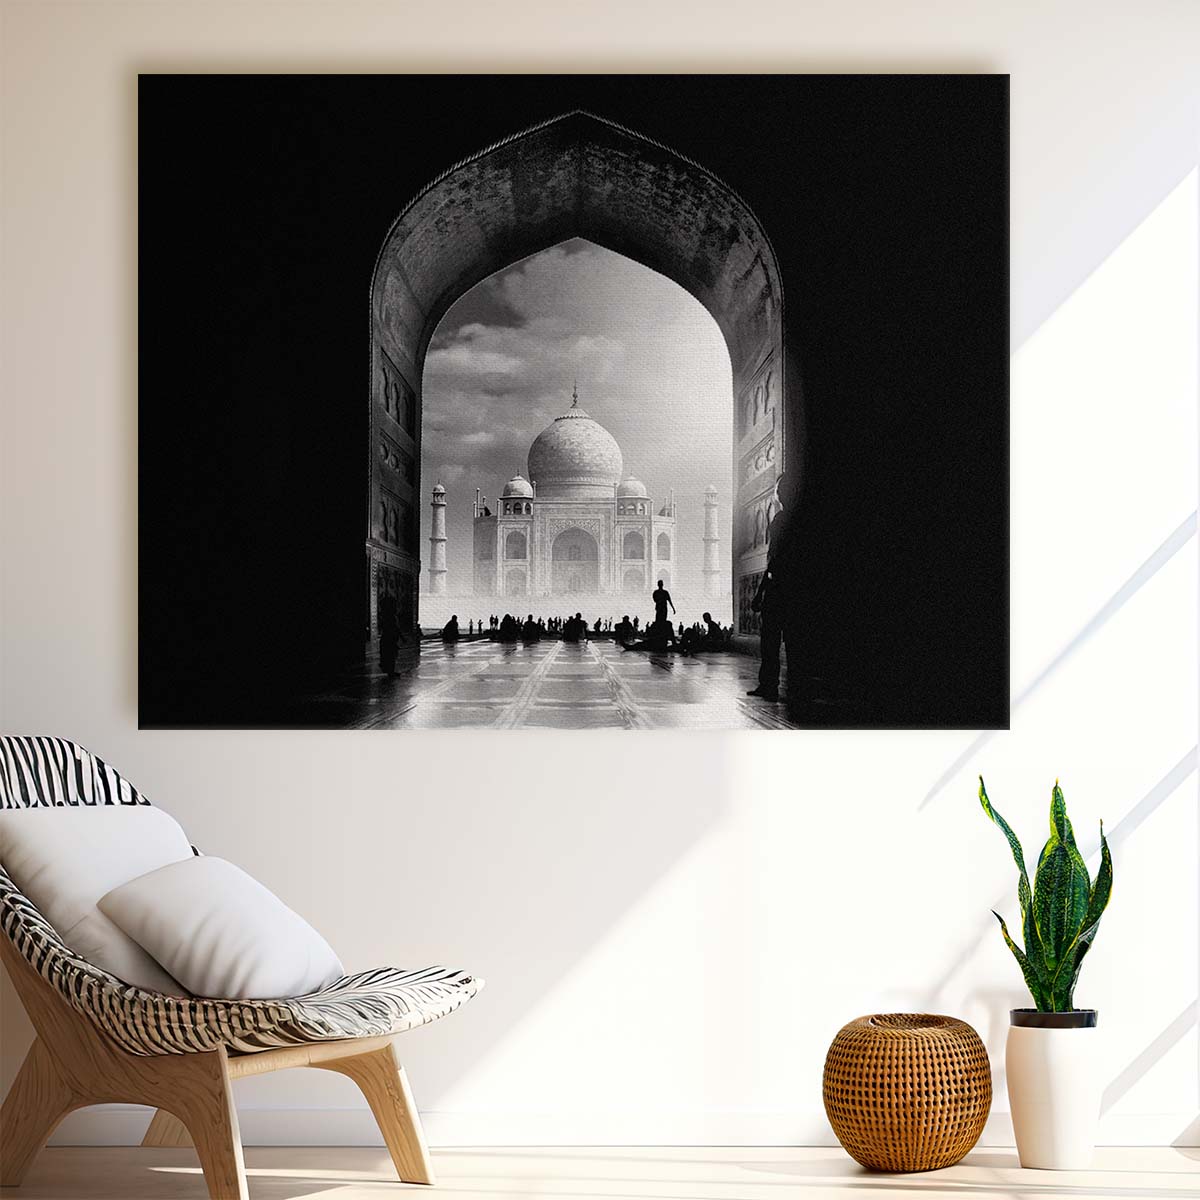 Taj Mahal Iconic Monochrome Architecture Wall Art by Luxuriance Designs. Made in USA.